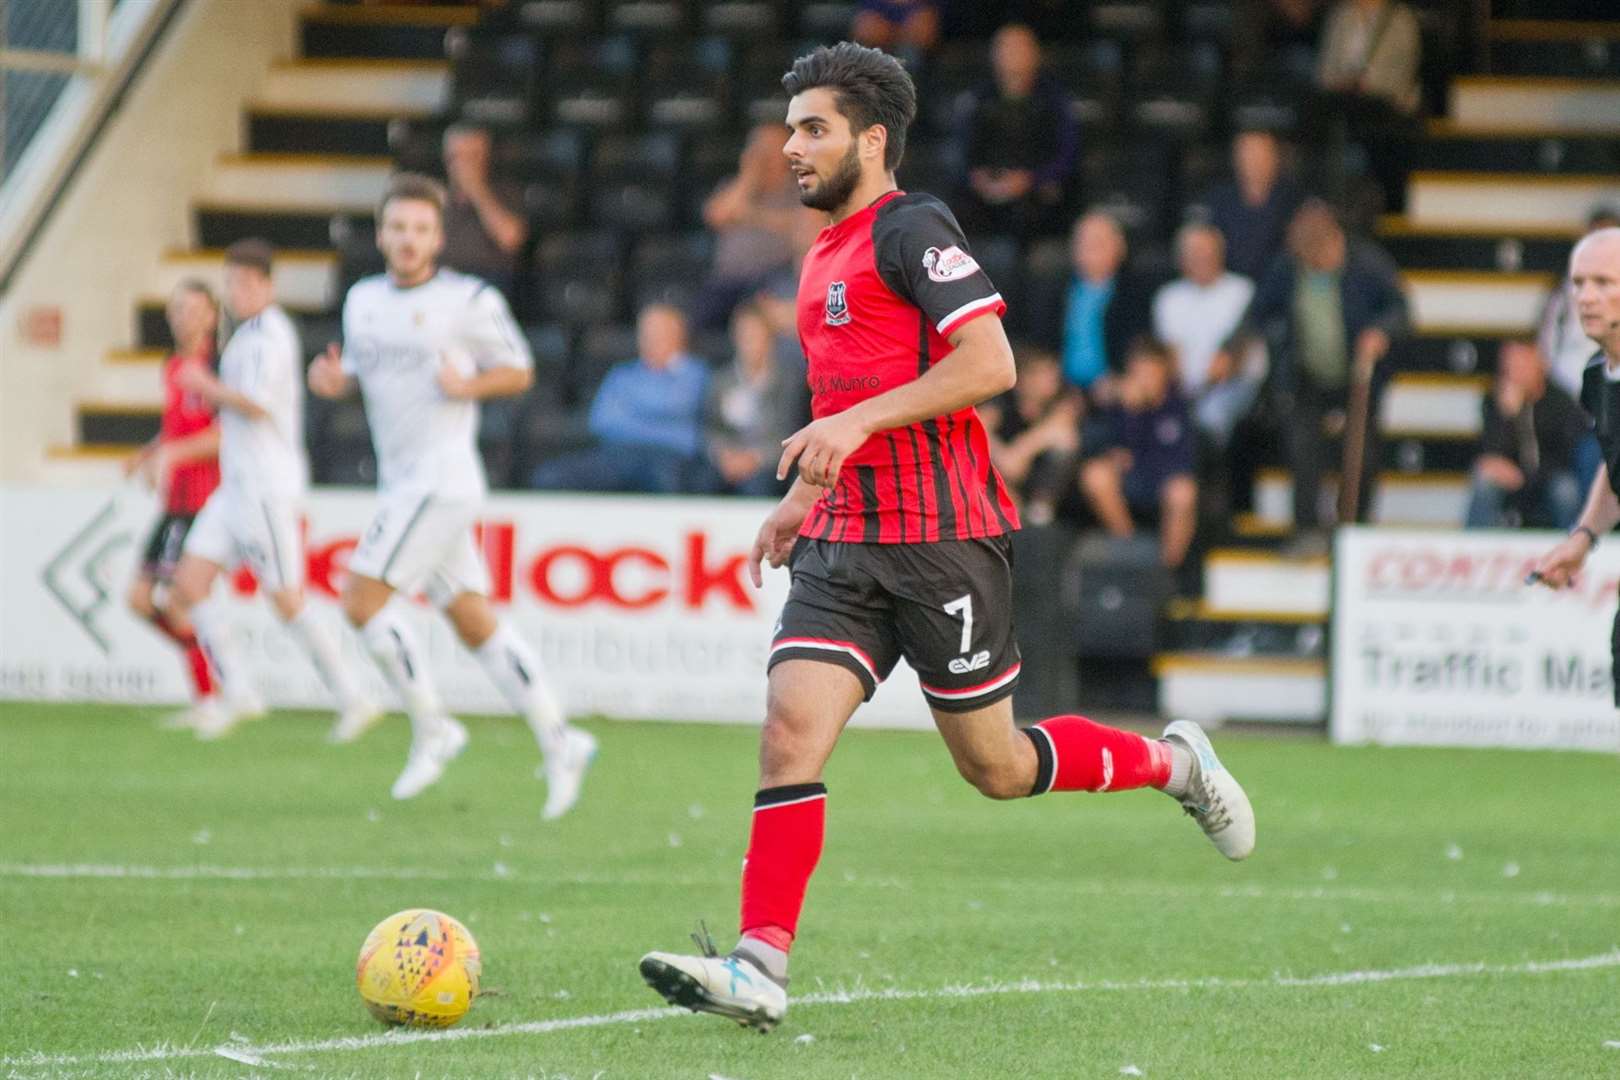 Rabin Omar played two seasons at Elgin City before switching to full-time football at Morton. Picture: Daniel Forsyth.